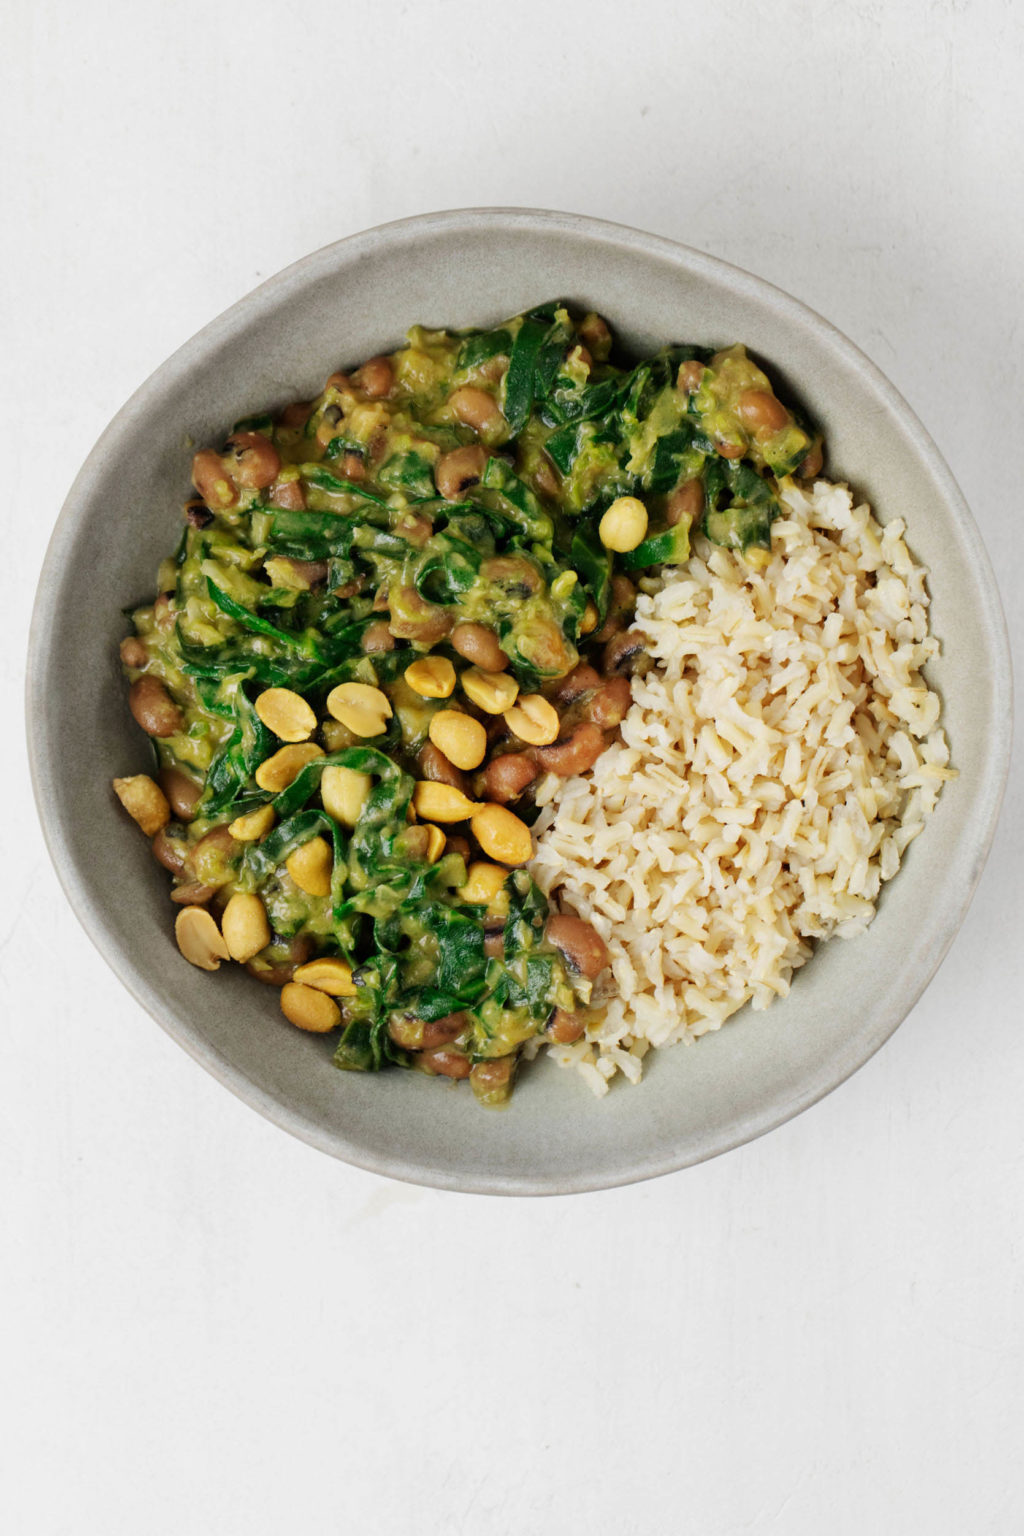 Greens and beans have been served in a ceramic bowl with brown rice. It rests on a white surface.